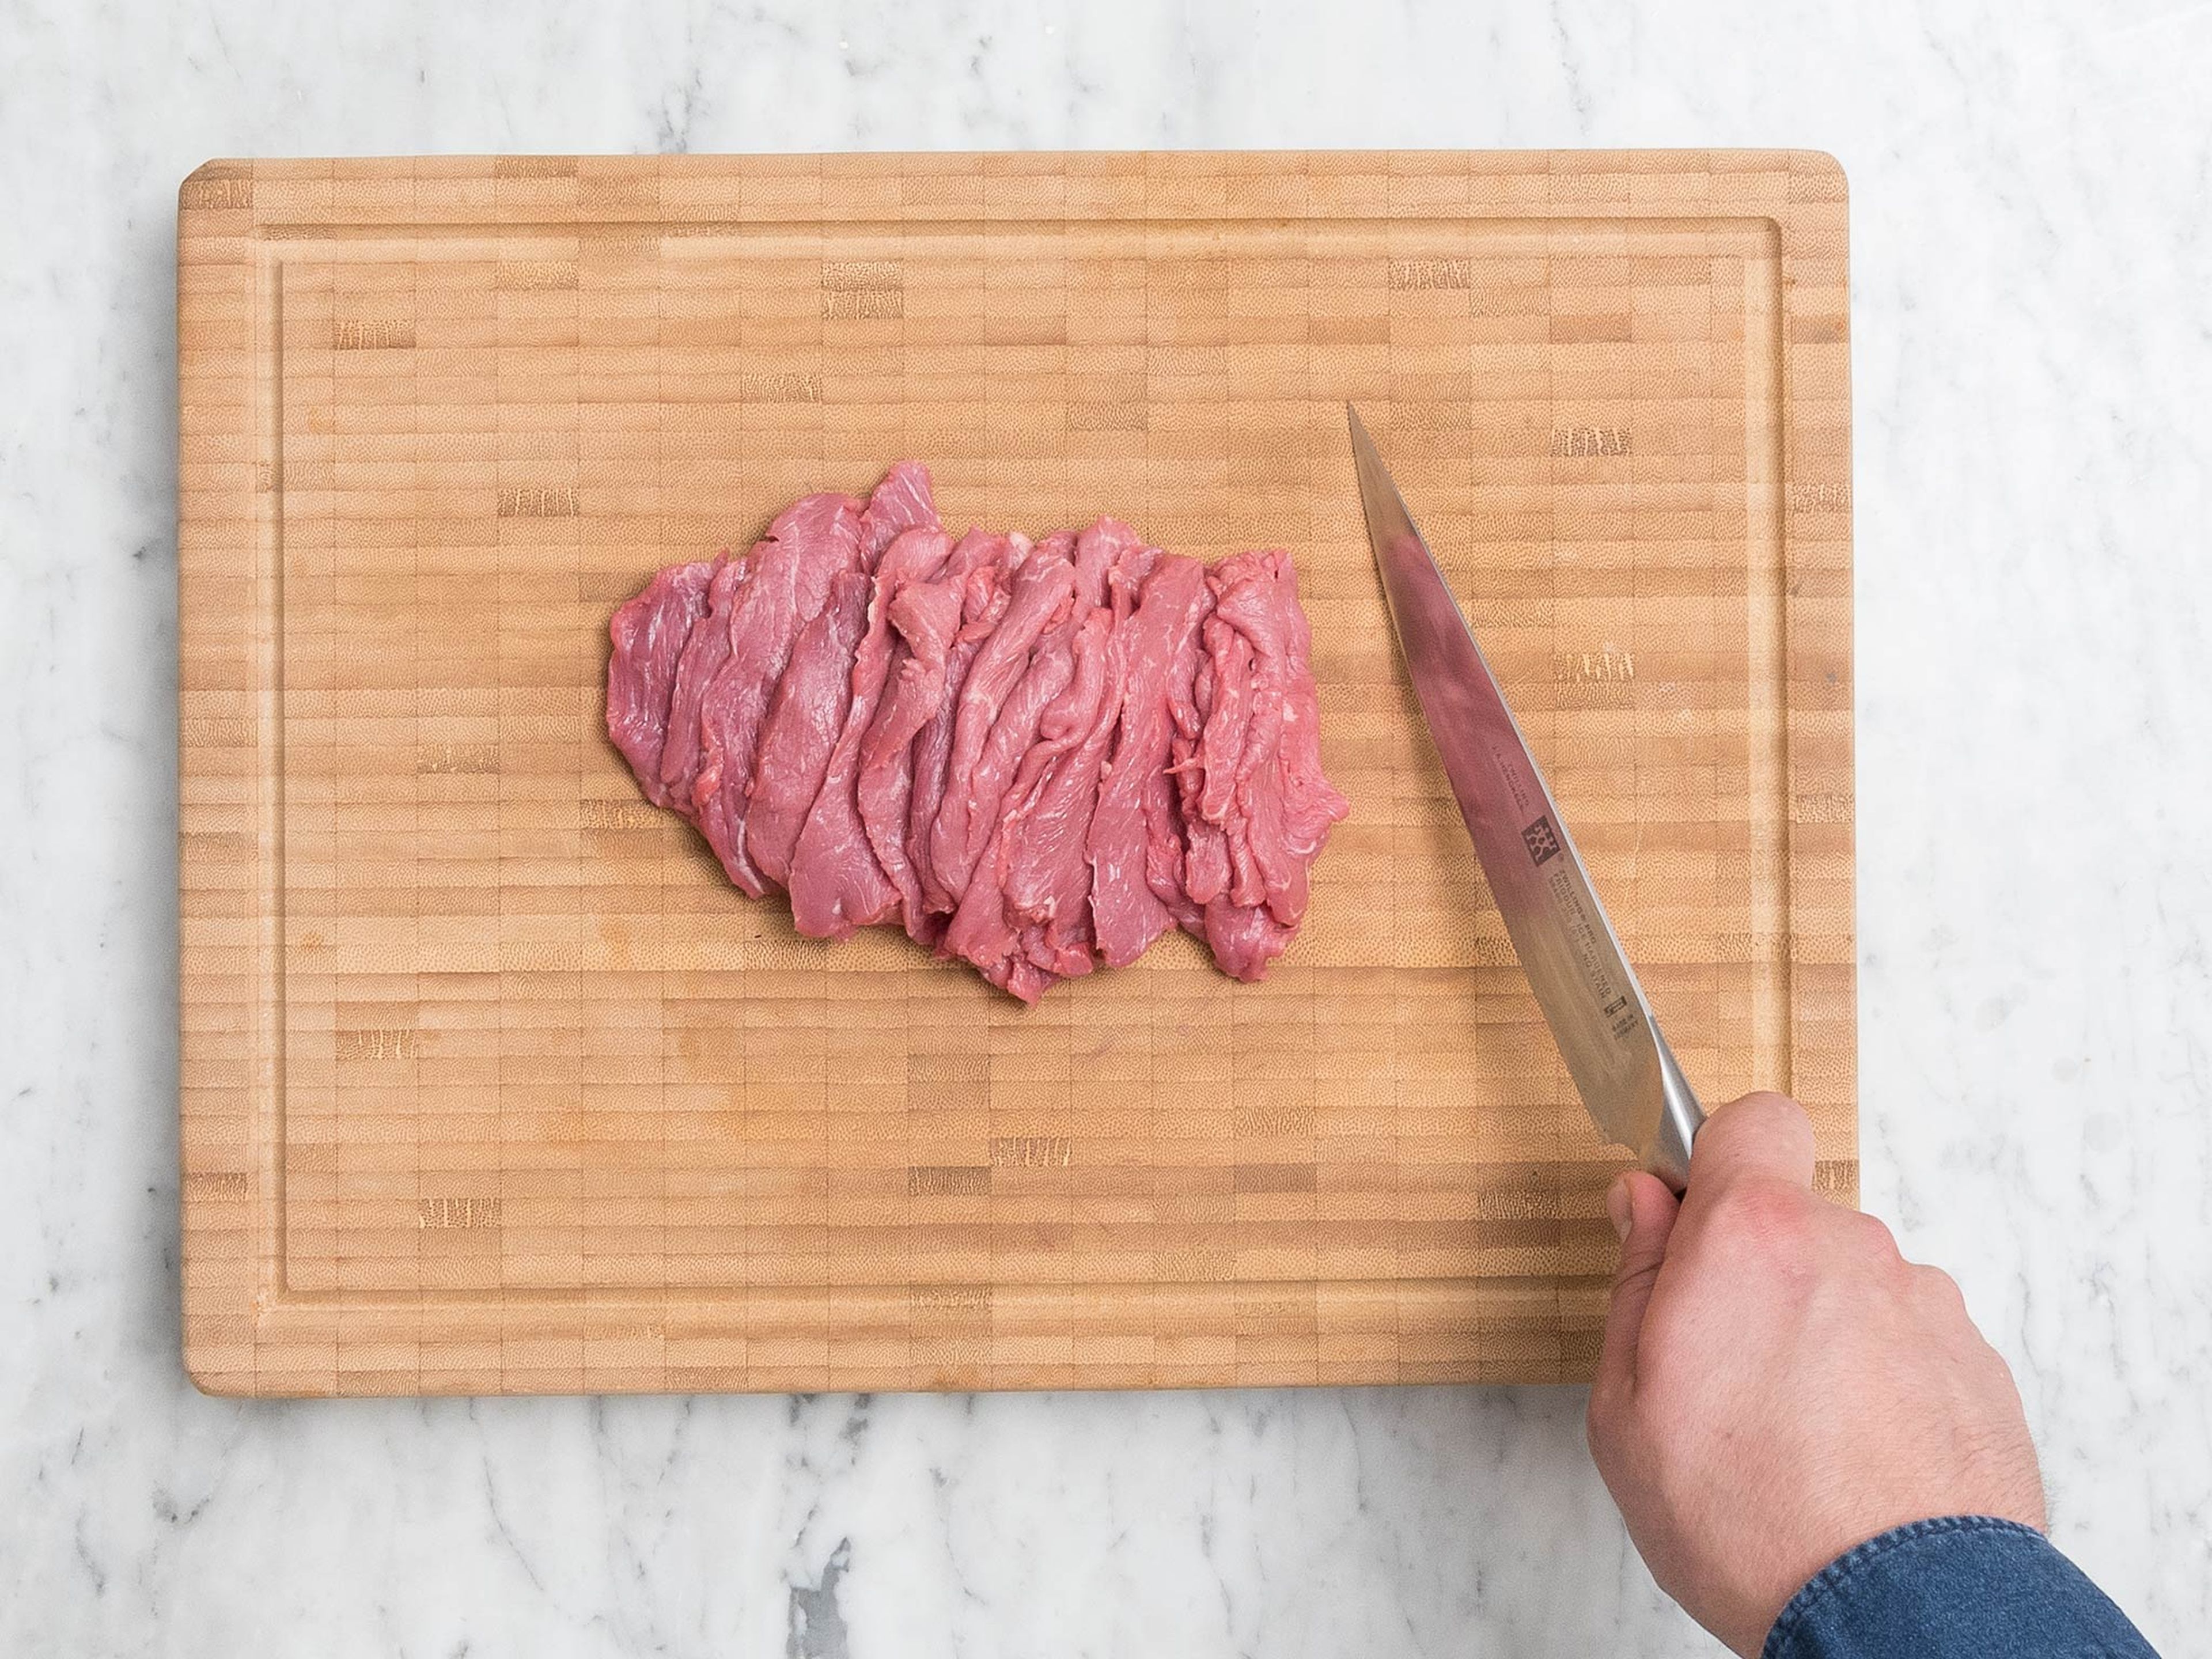 Trim extra fat from beef sirloin, pat dry with paper towels, and cut into strips.